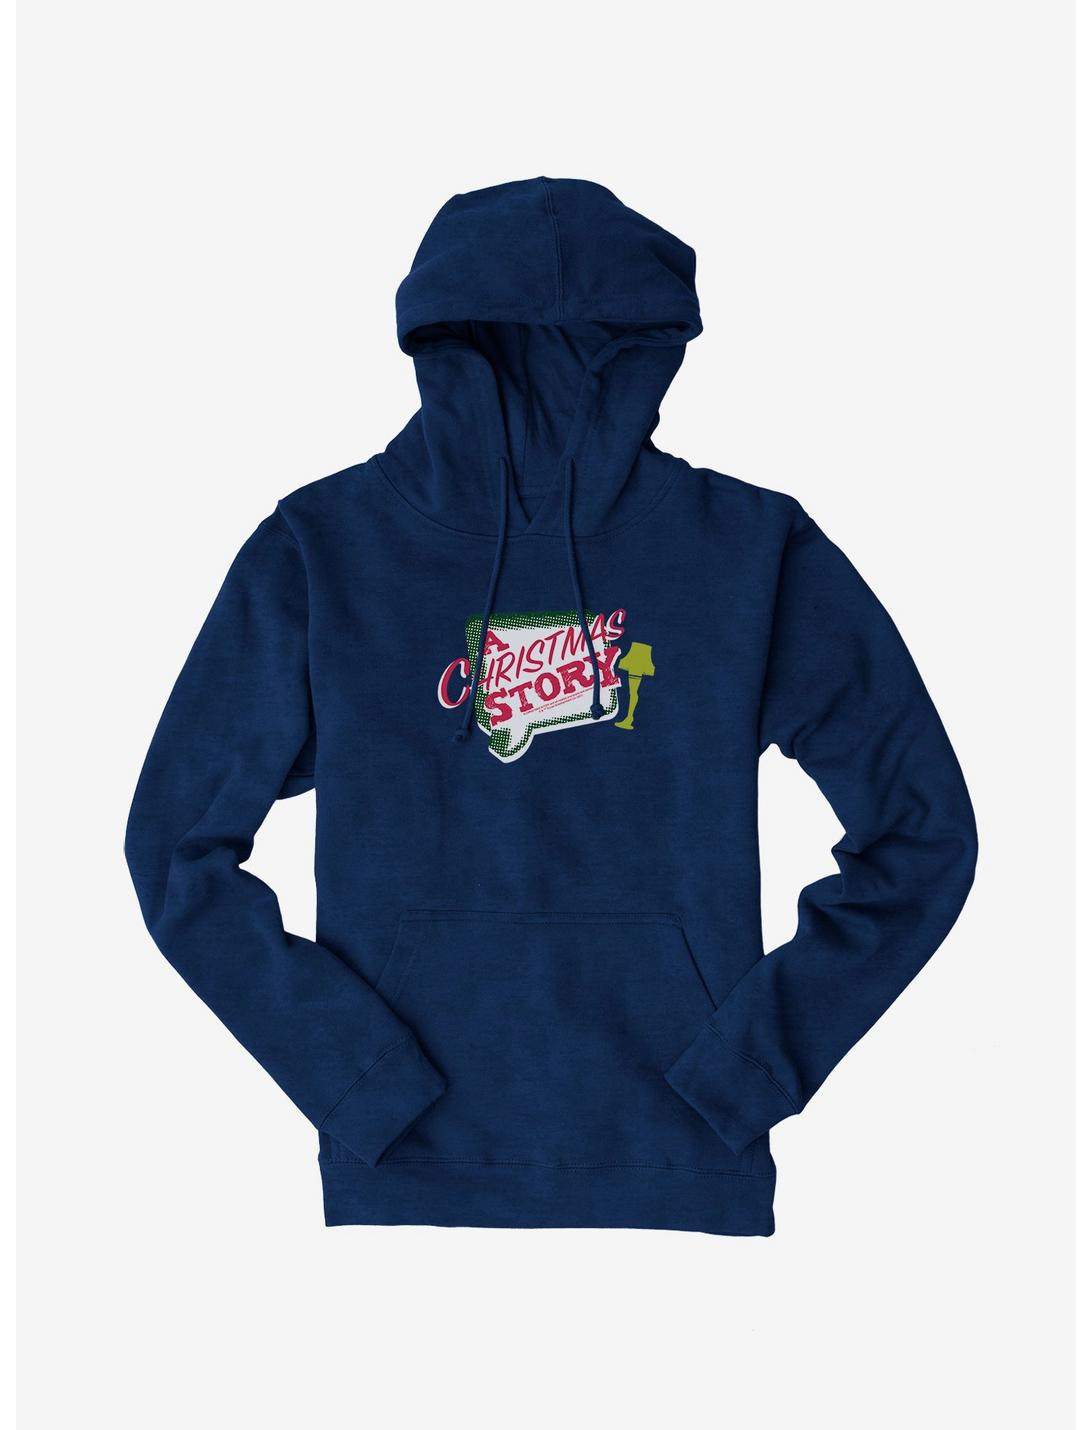 A Christmas Story  Lamp Bubble  Hoodie, NAVY, hi-res